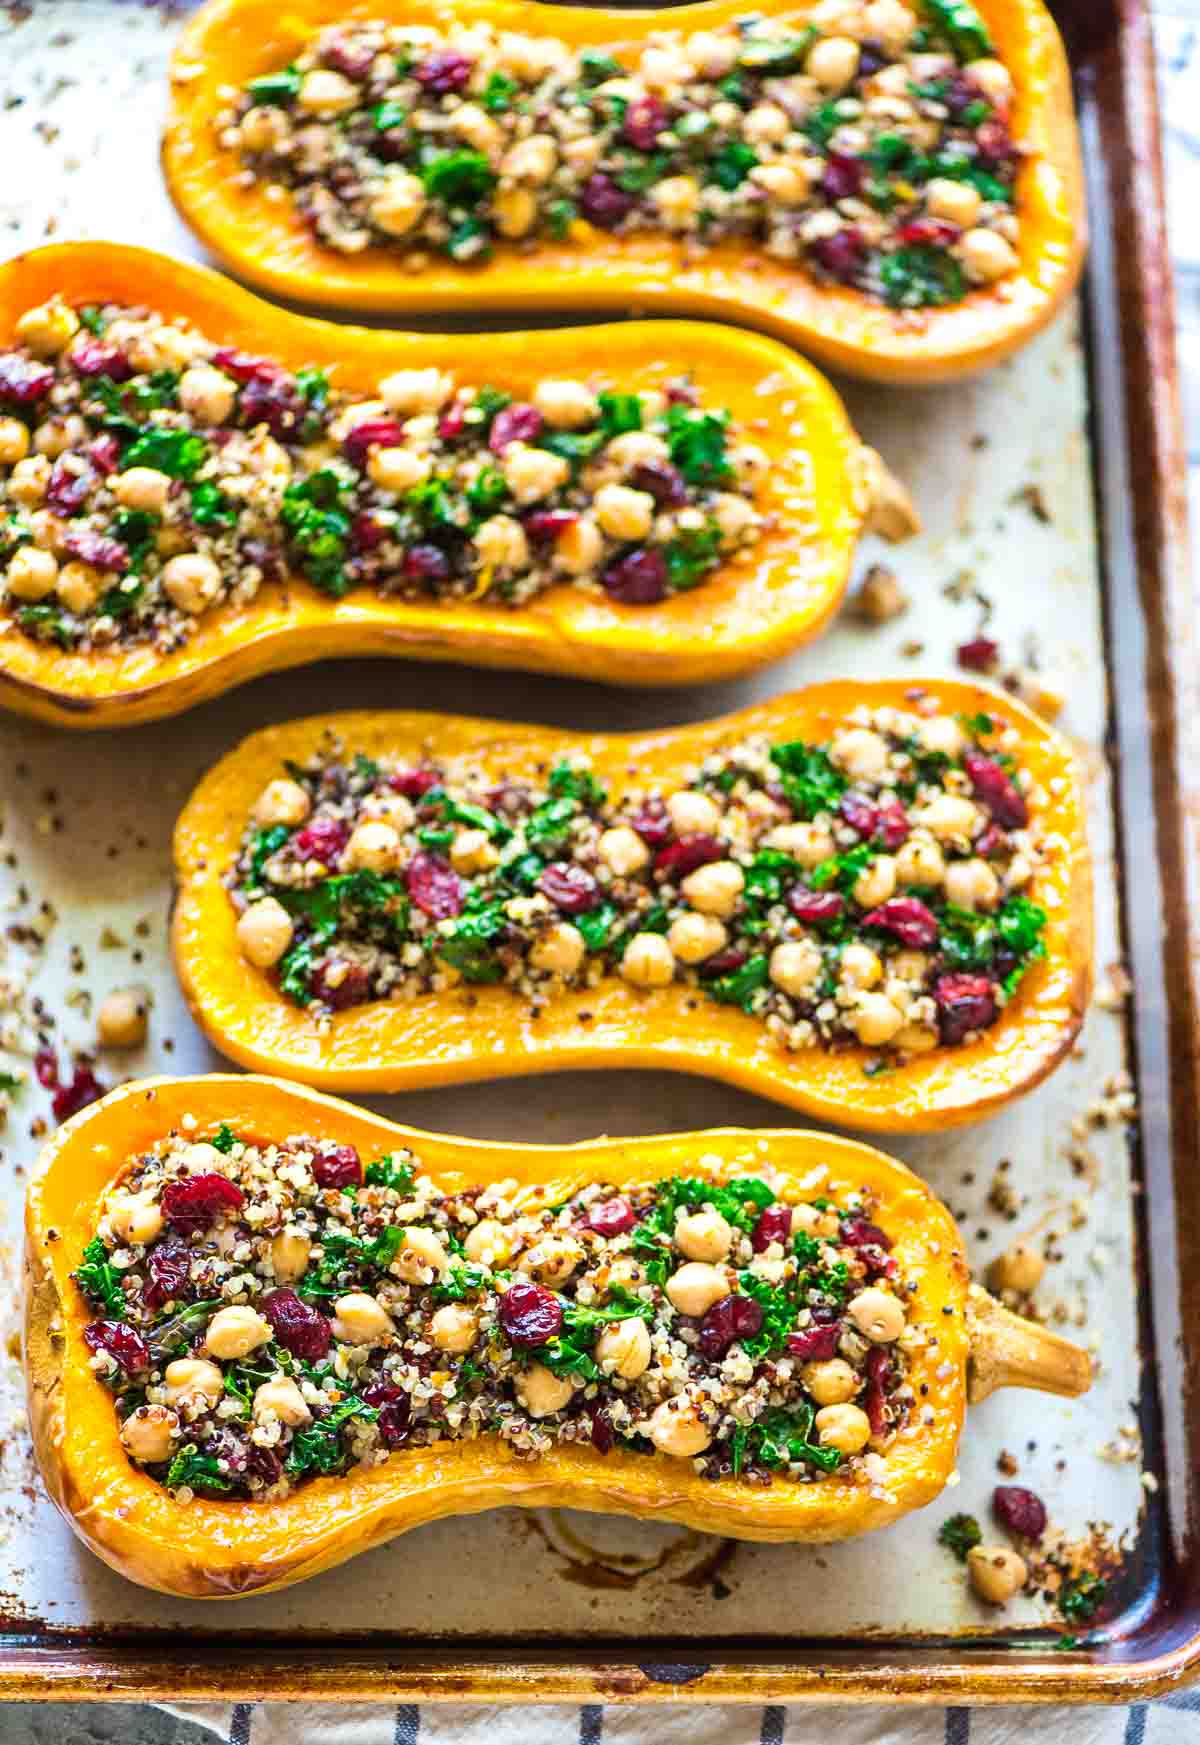 Stuffed Butternut Squash With Quinoa Kale Cranberries And Chickpeas